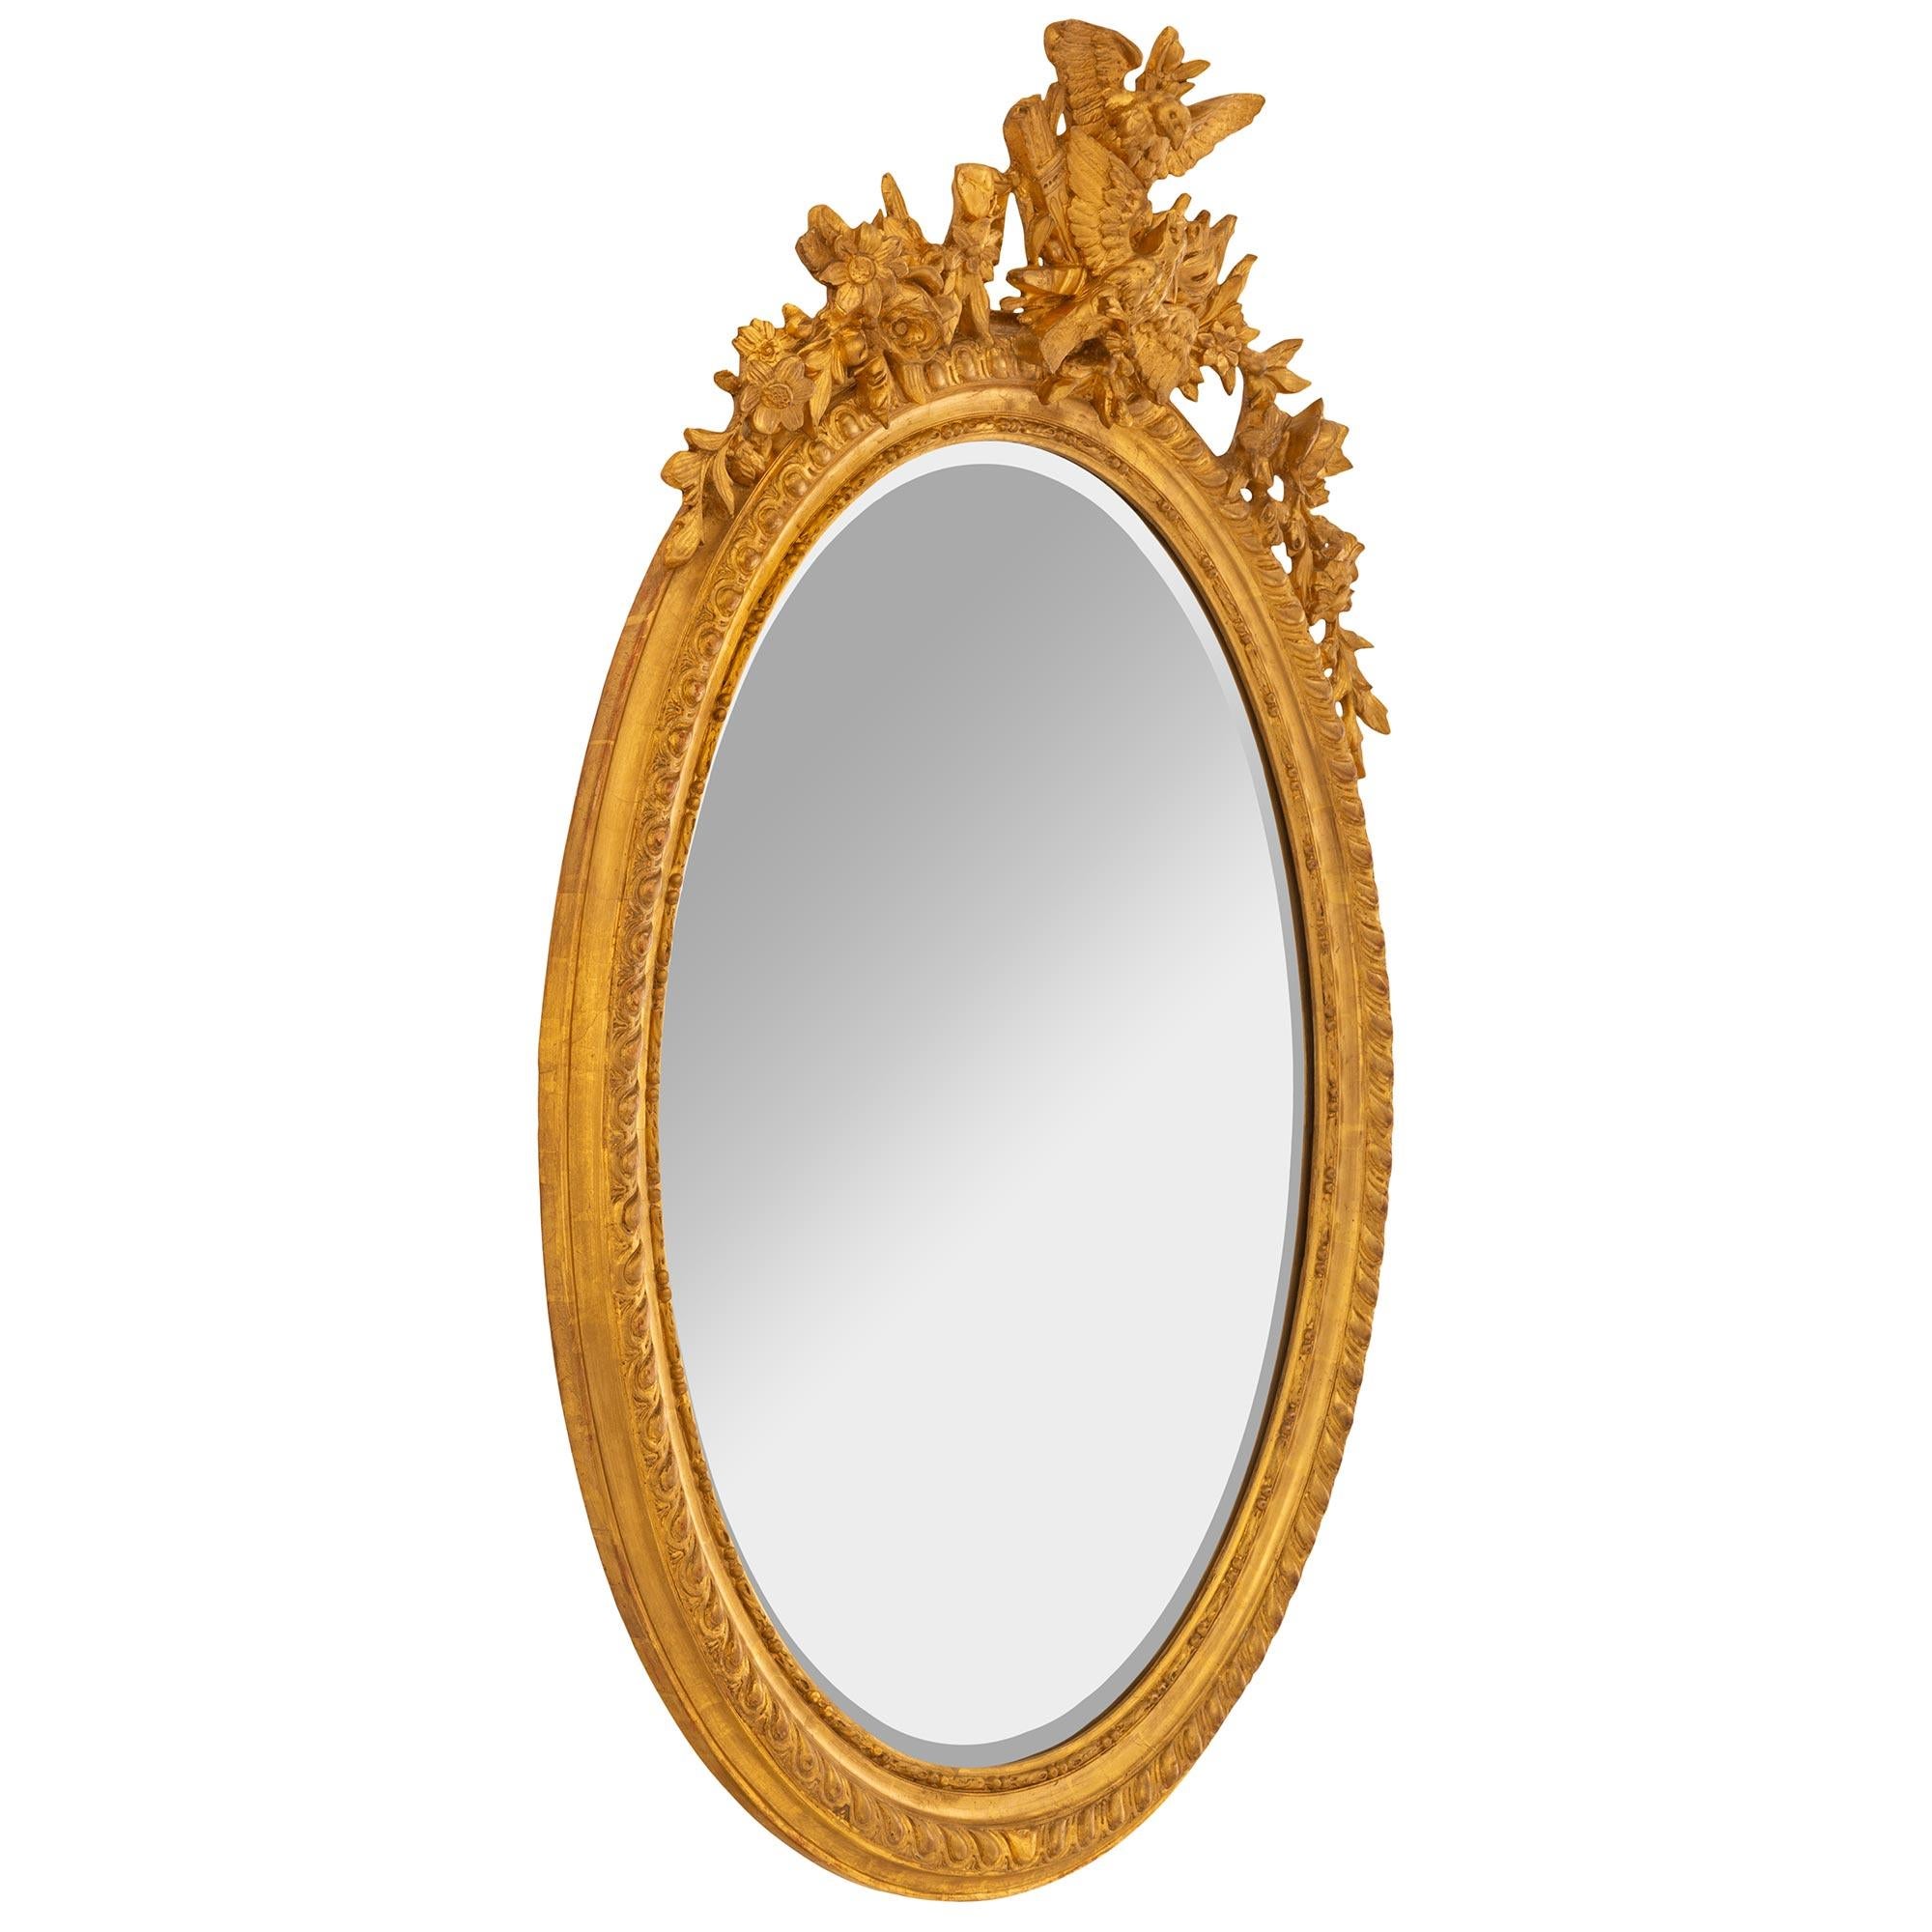 A most elegant French 19th century Louis XVI st. oval Giltwood mirror. The mirror plate is framed within a lovely beaded mottled border. At the edge is a fine twisted gadroon design which extends throughout the frame. Above is the beautiful and